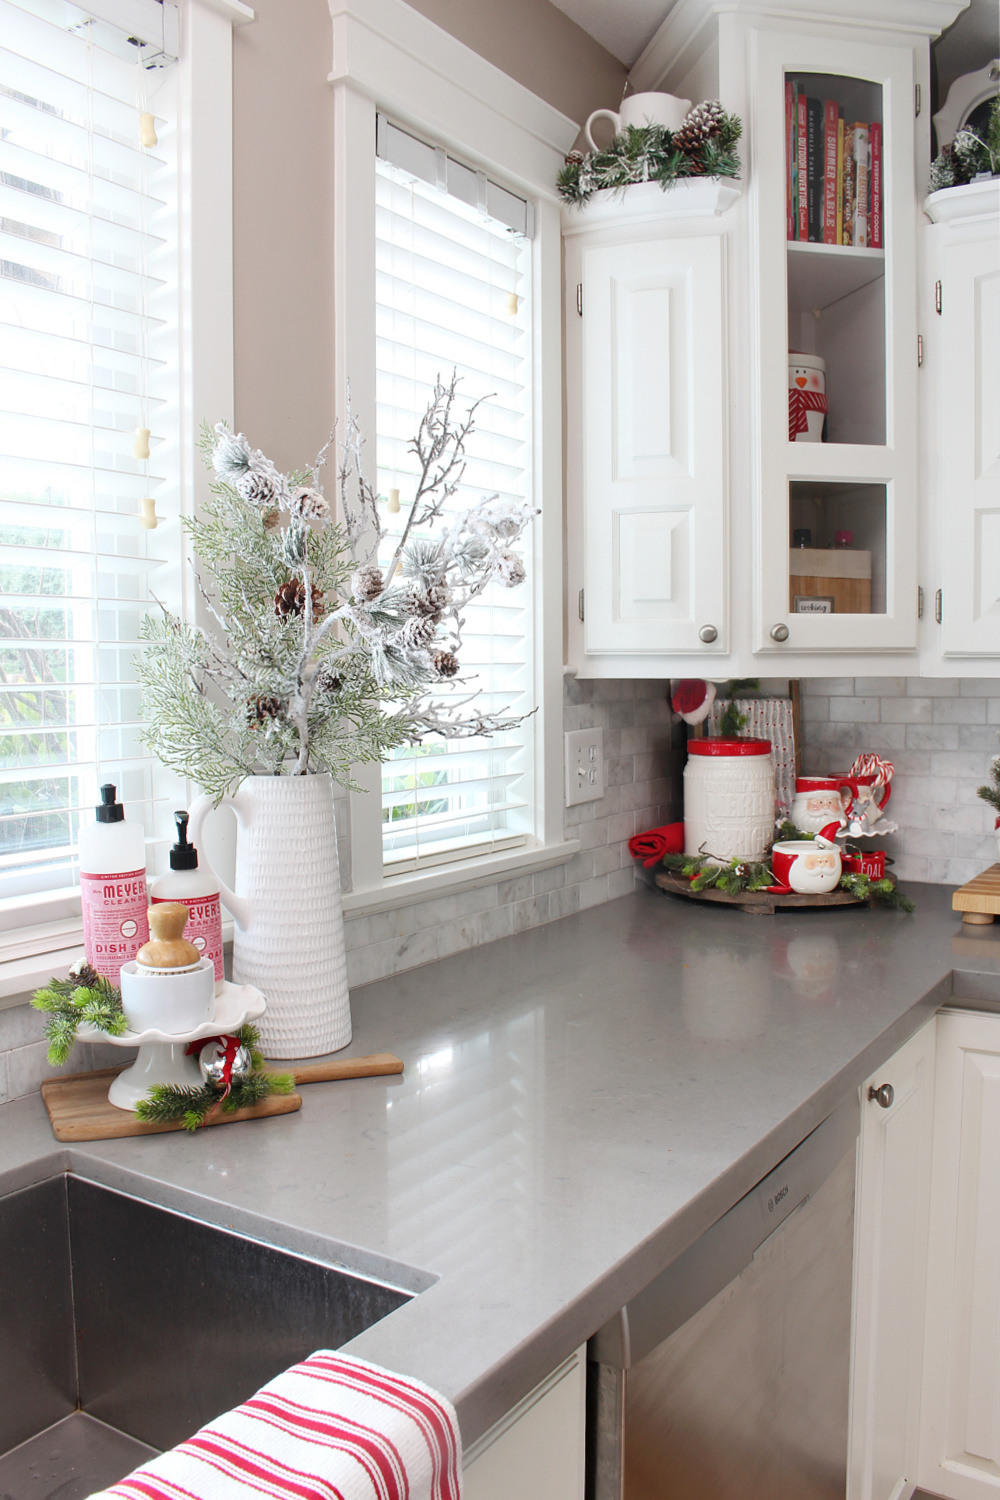 Christmas display in a red and white Christmas kitchen.